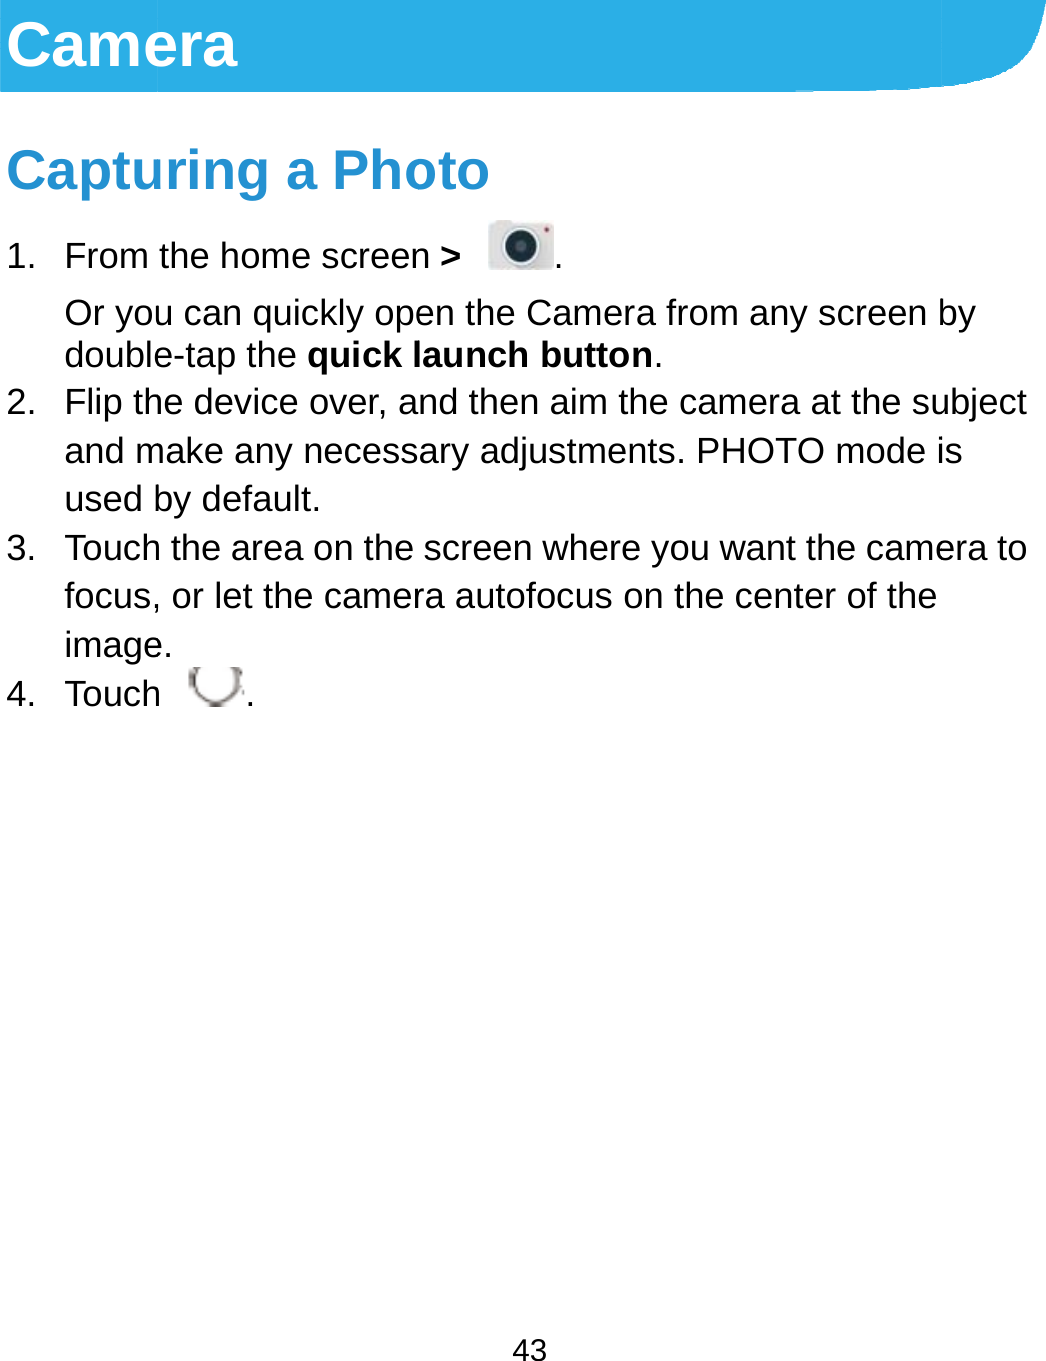 CameCaptu1. From Or youdouble2. Flip thand mused b3. Touchfocus,image4. Touchera uring a Phothe home screenu can quickly opee-tap the quick lhe device over, amake any necessby default. h the area on the , or let the camere. h .  43 oto n &gt;  . en the Camera frlaunch button.nd then aim the ary adjustments.screen where yora autofocus on trom any screen bcamera at the su. PHOTO mode iou want the camethe center of the by ubject is era to 